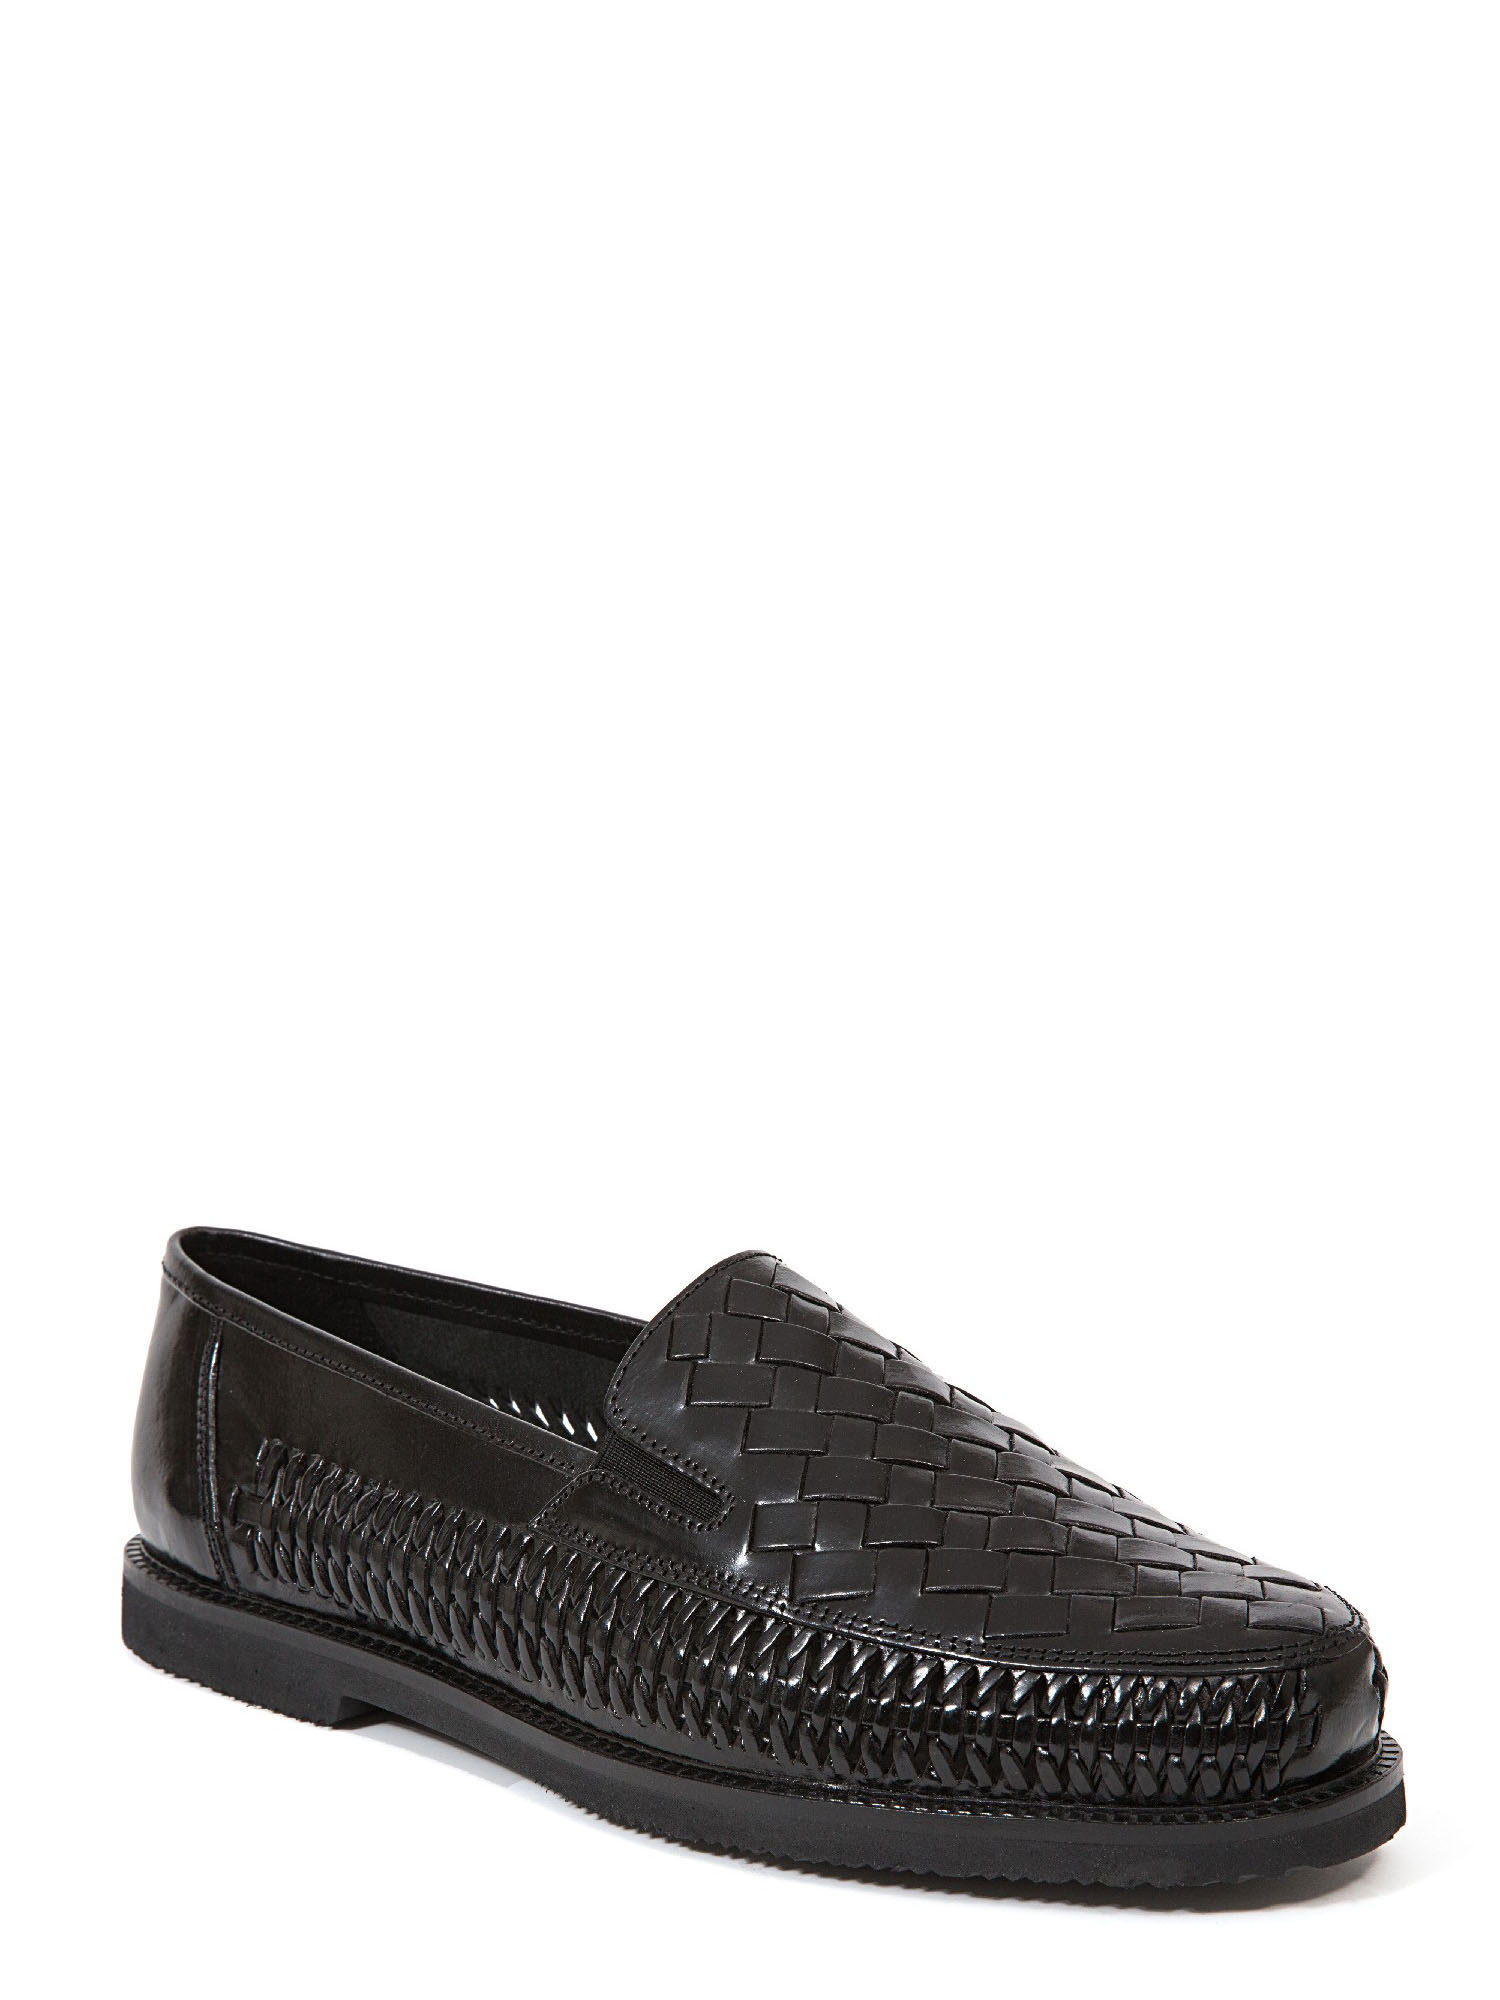 Deer Stags Men's Tijuana Classic Dress Loafer (Wide Available) - image 1 of 9